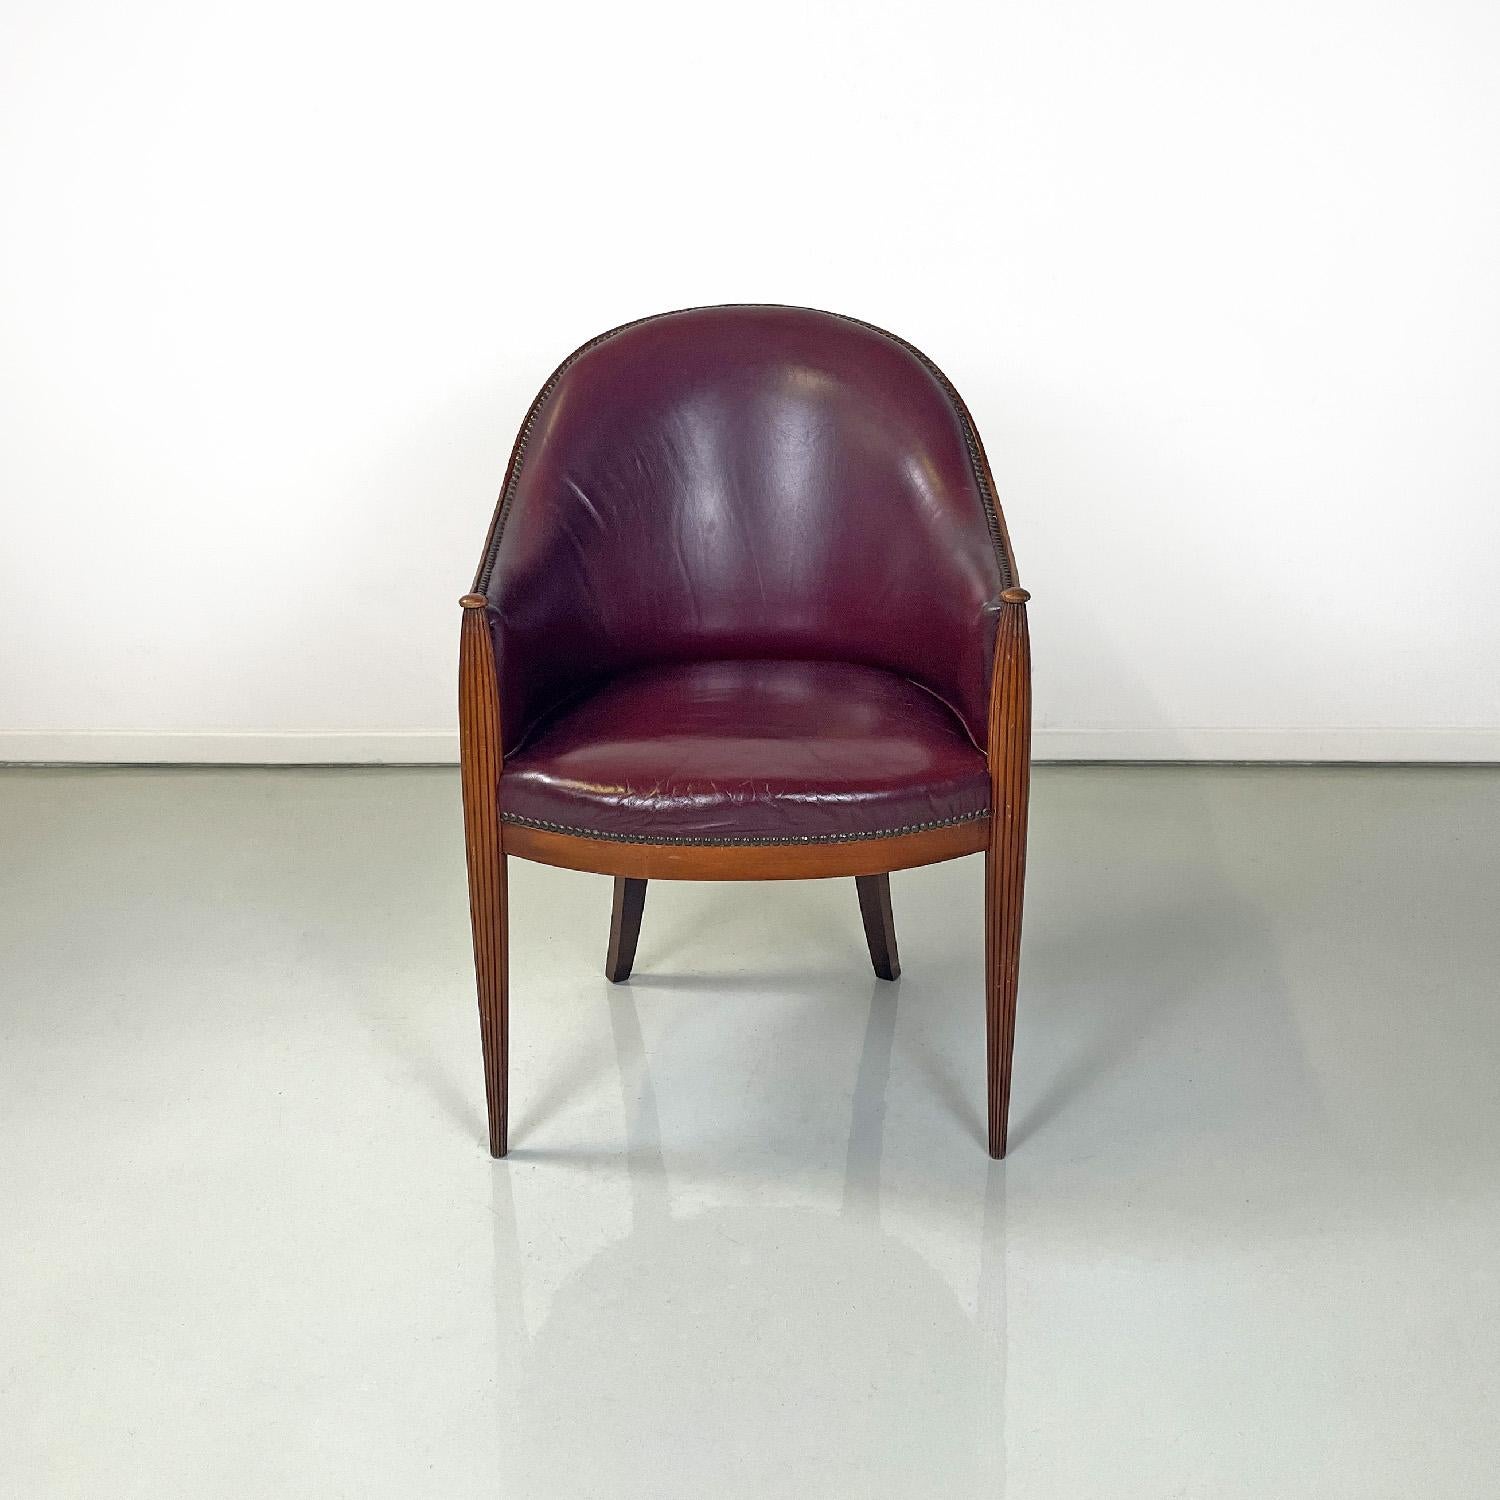 Mid-Century Modern Italian mid-century modern wine-colored leather armchair with studs, 1950s For Sale